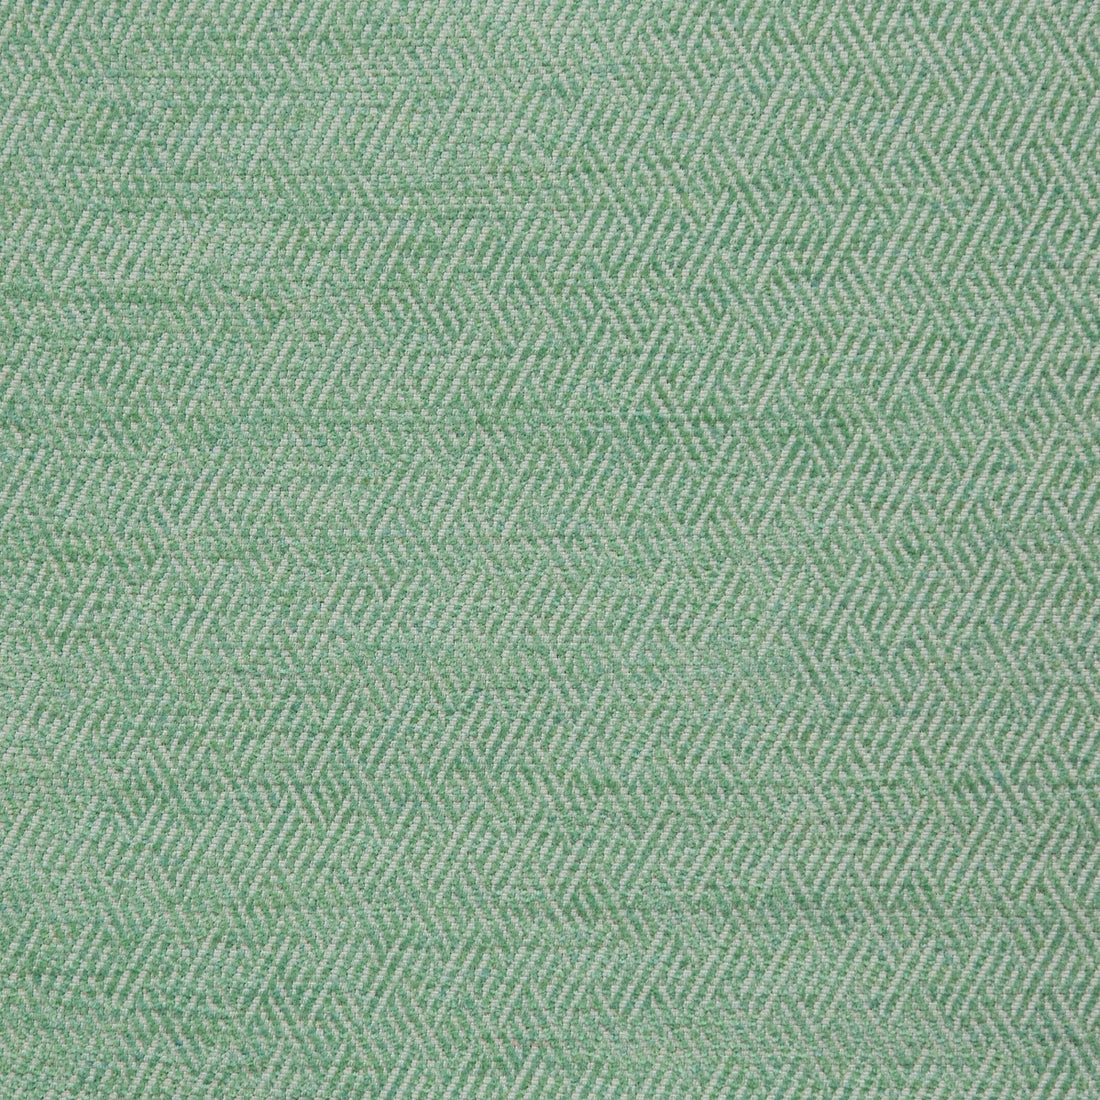 Basslet fabric in aloe color - pattern 35822.3.0 - by Kravet Design in the Indoor / Outdoor collection